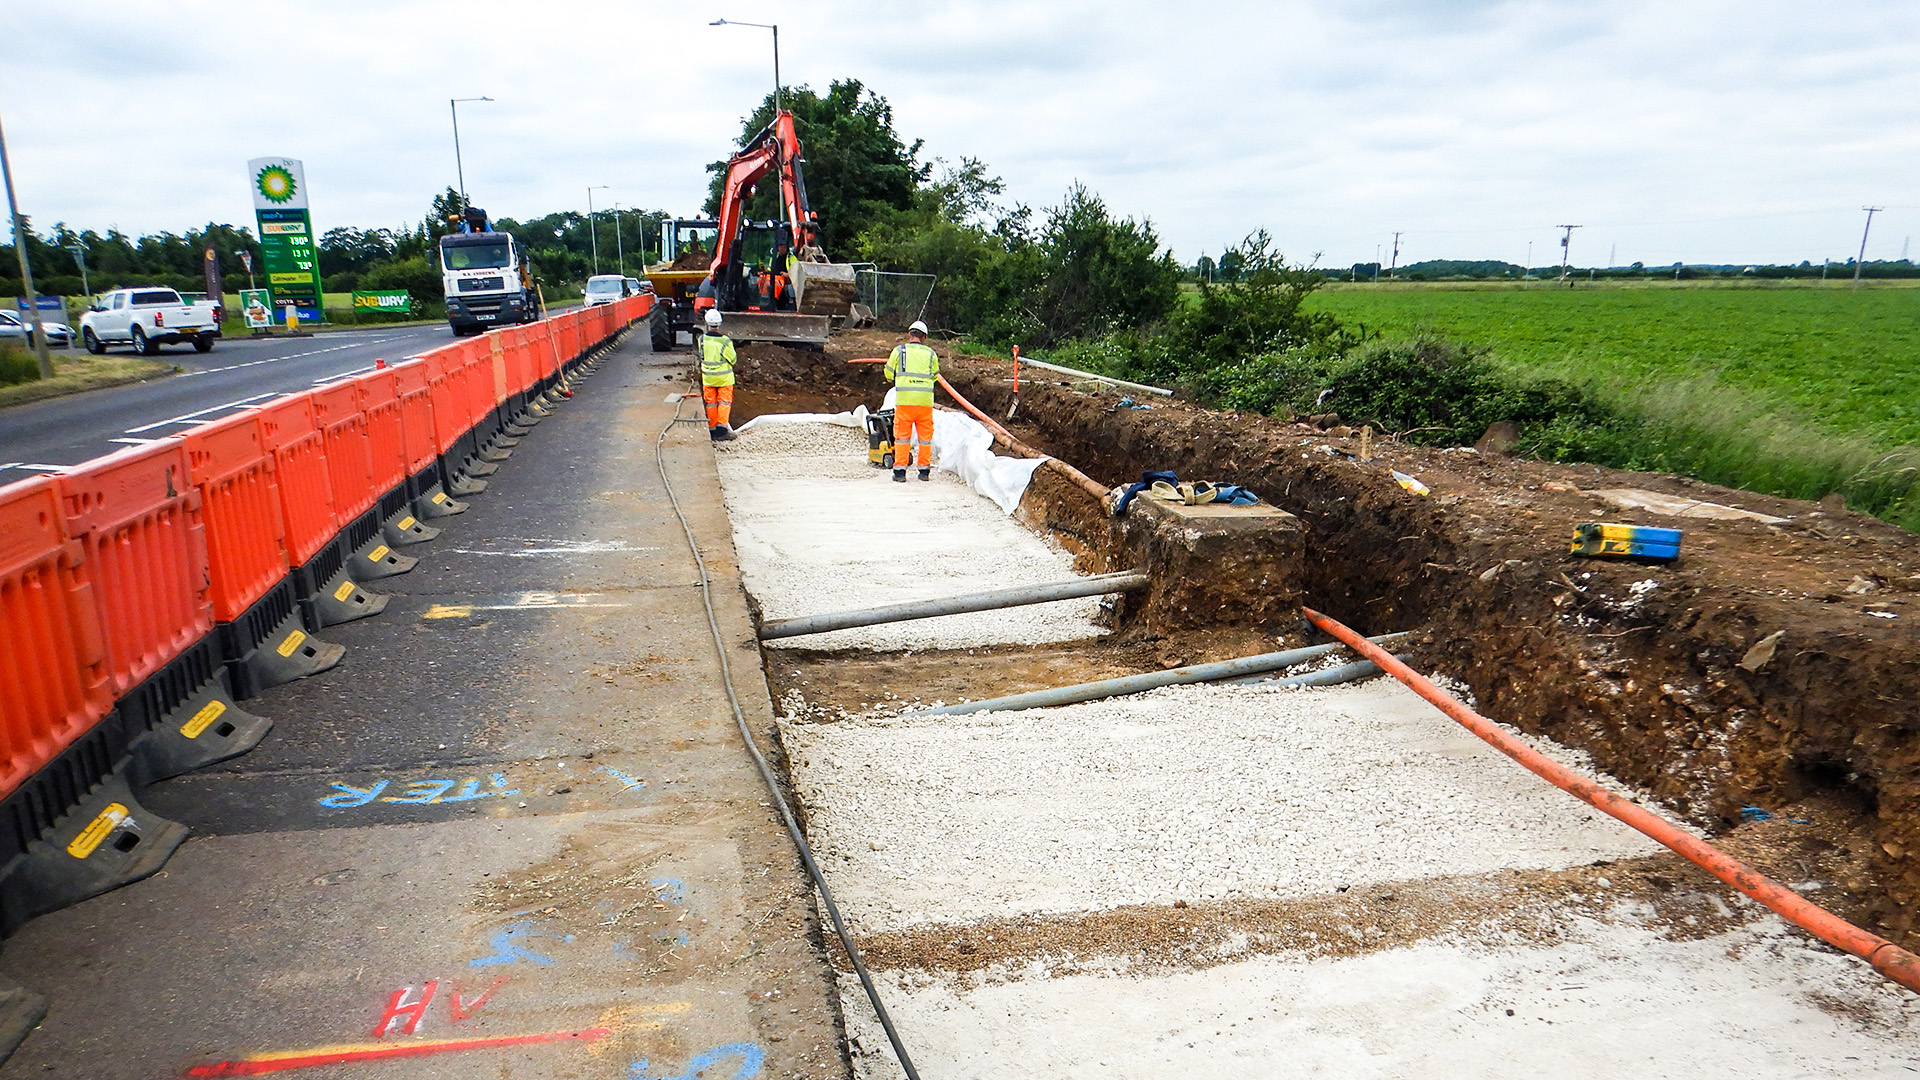 A15 Lincoln new carriageway construction works